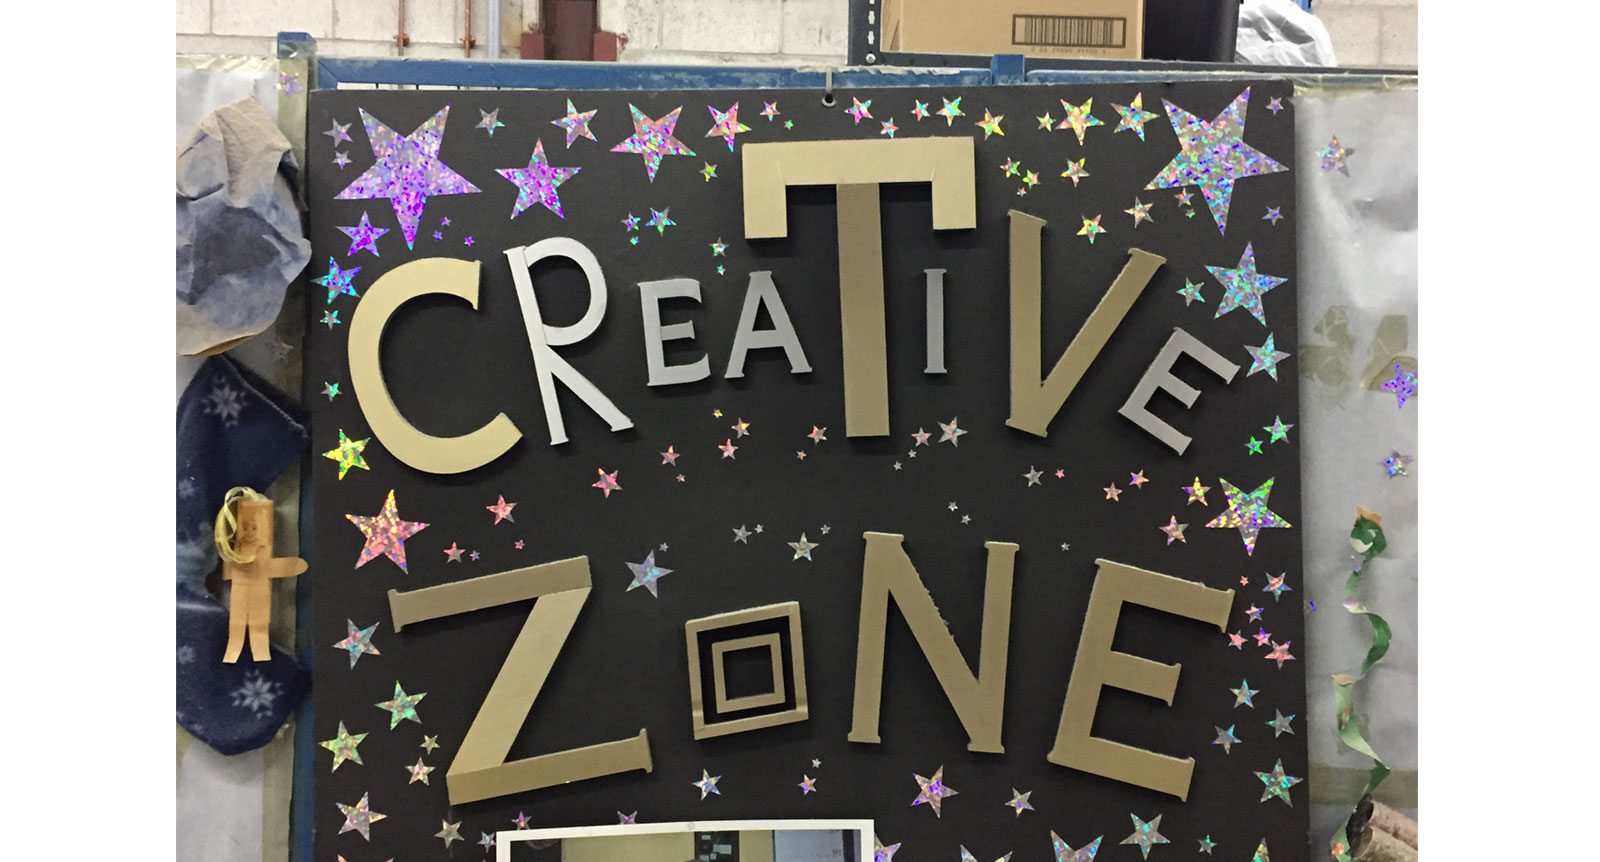 The Creative Zone: What Better Way to Reduce, Reuse and Recycle?